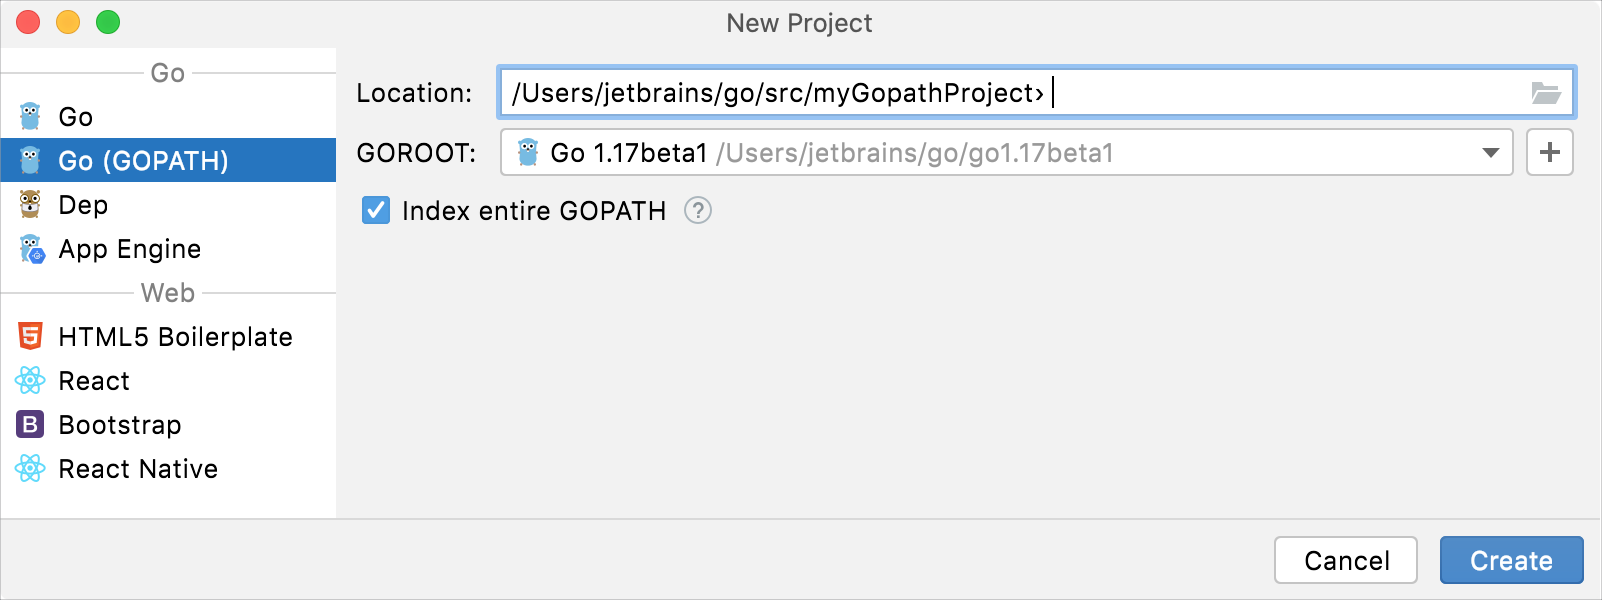 Create a project with Go (GOPATH) integration